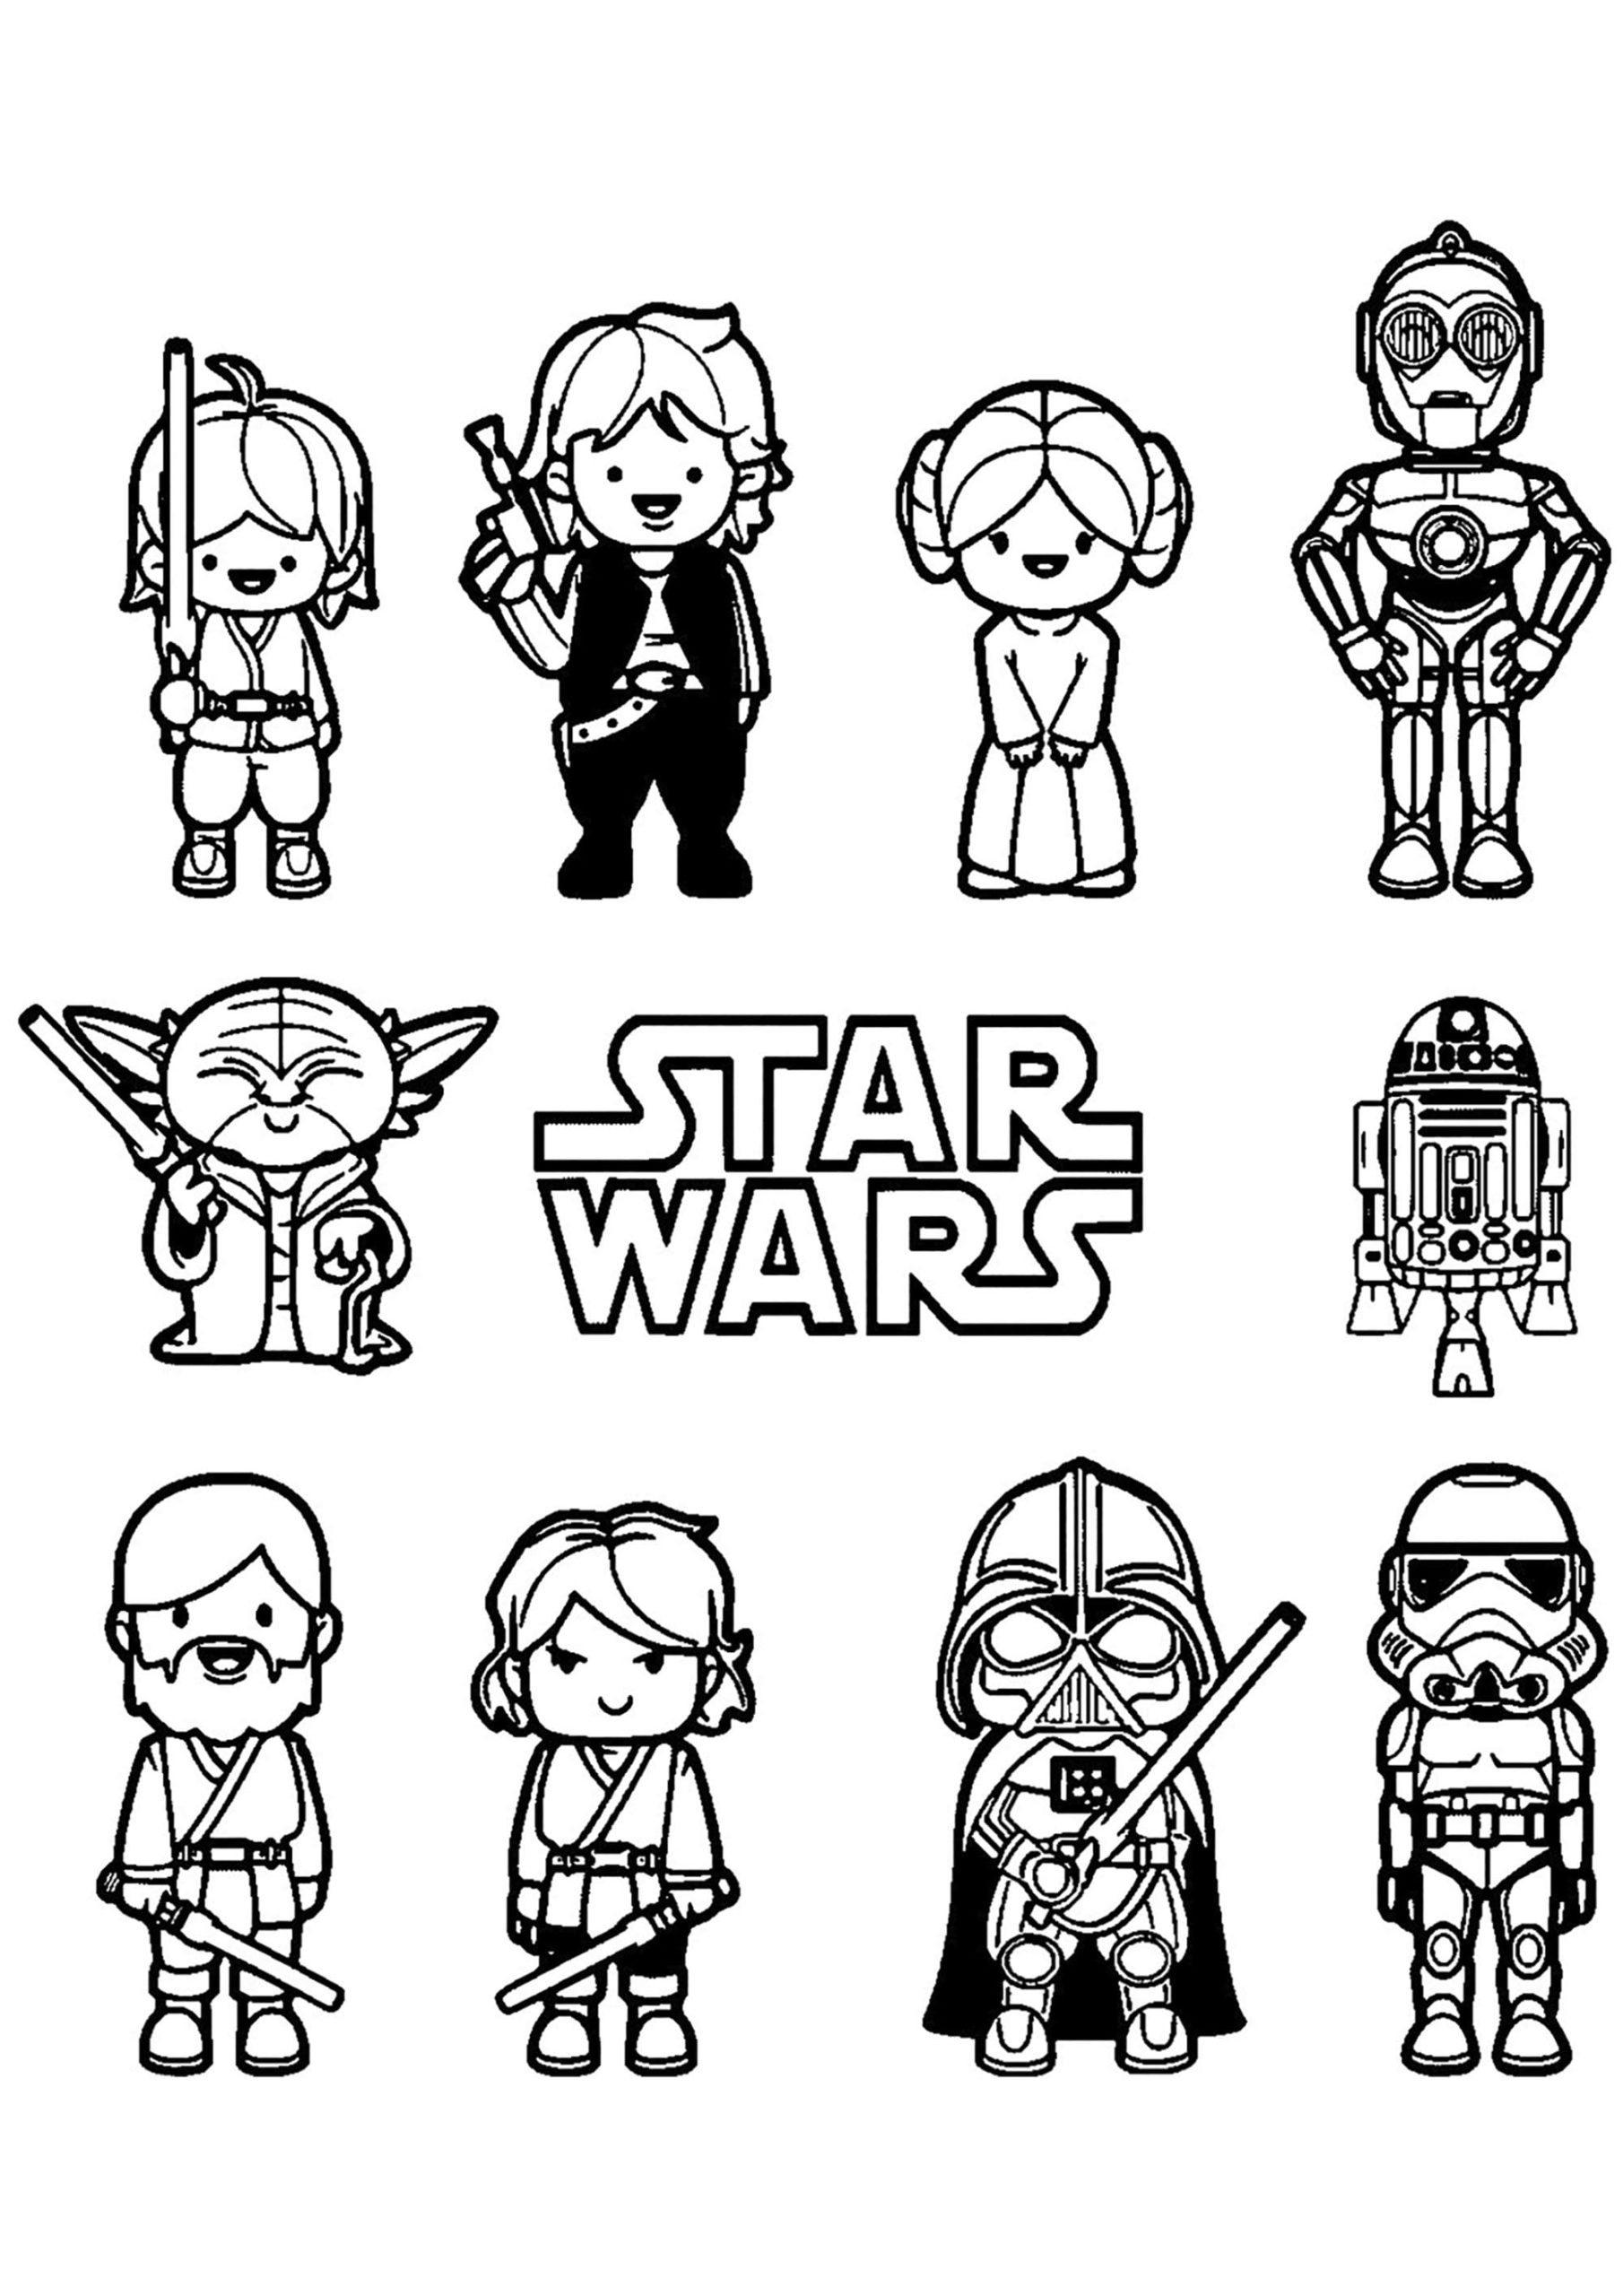 Star Wars 44 Lego Star Wars coloring page to print and coloring